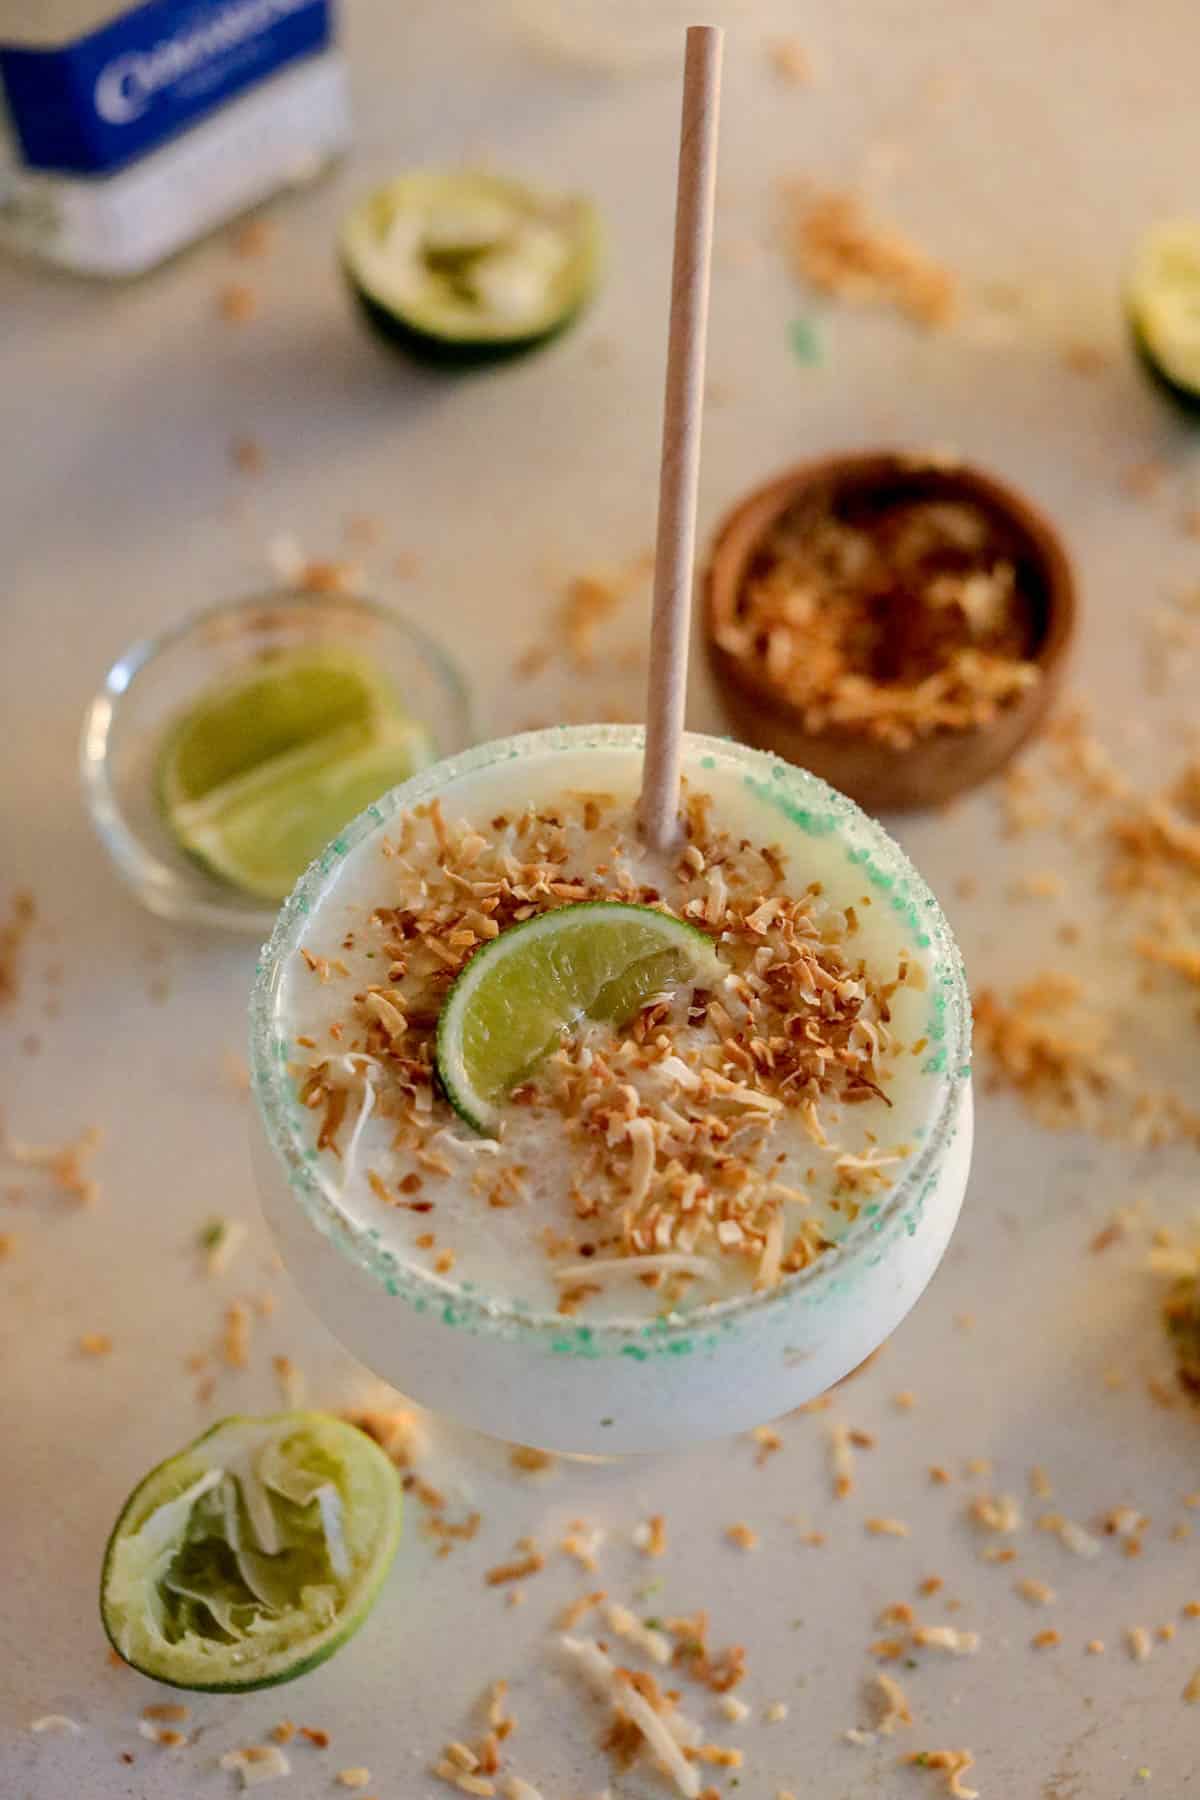 White frozen liquid in a glass with a straw and green sugar around the rim with limes and toasted coconut on the beige counter.